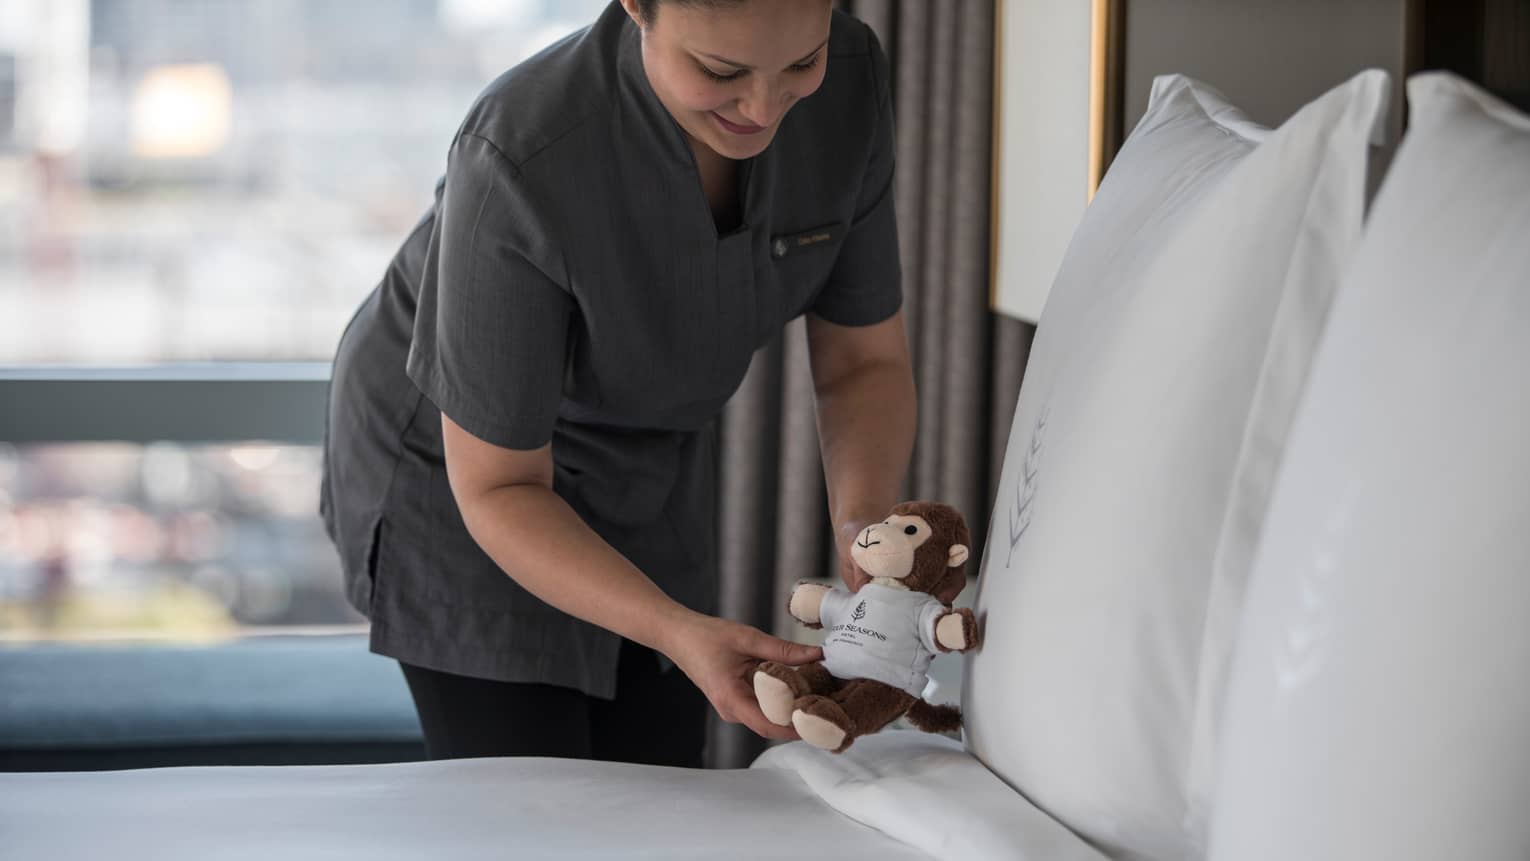 Hotel staff sets small stuffed monkey toy down on made hotel bed